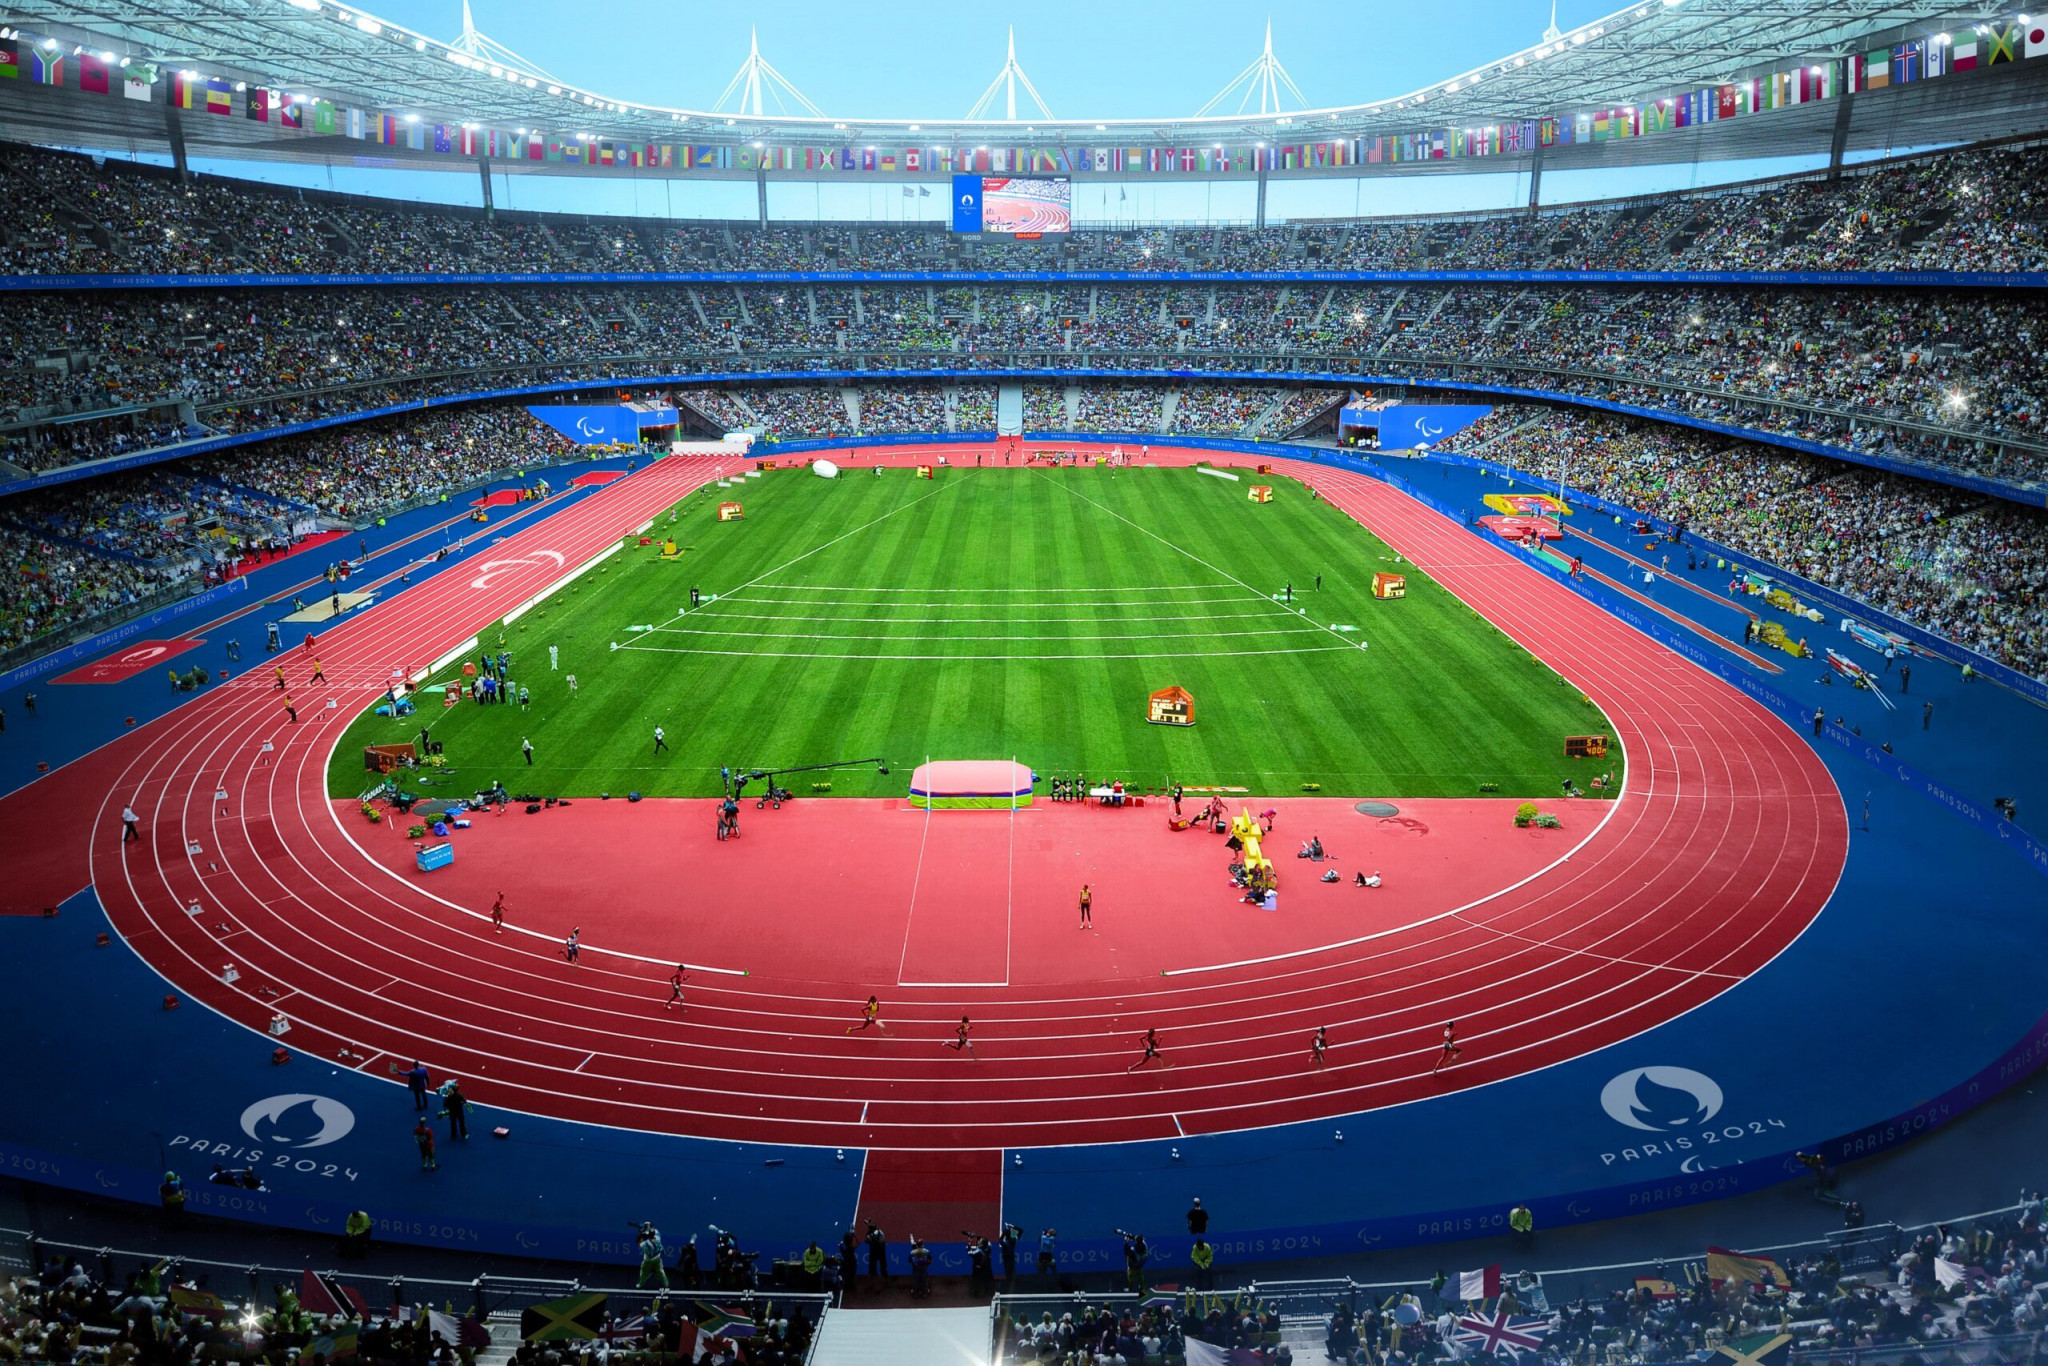 The Stade de France will host athletics during next year's Olympic Games in Paris ©Paris 2024